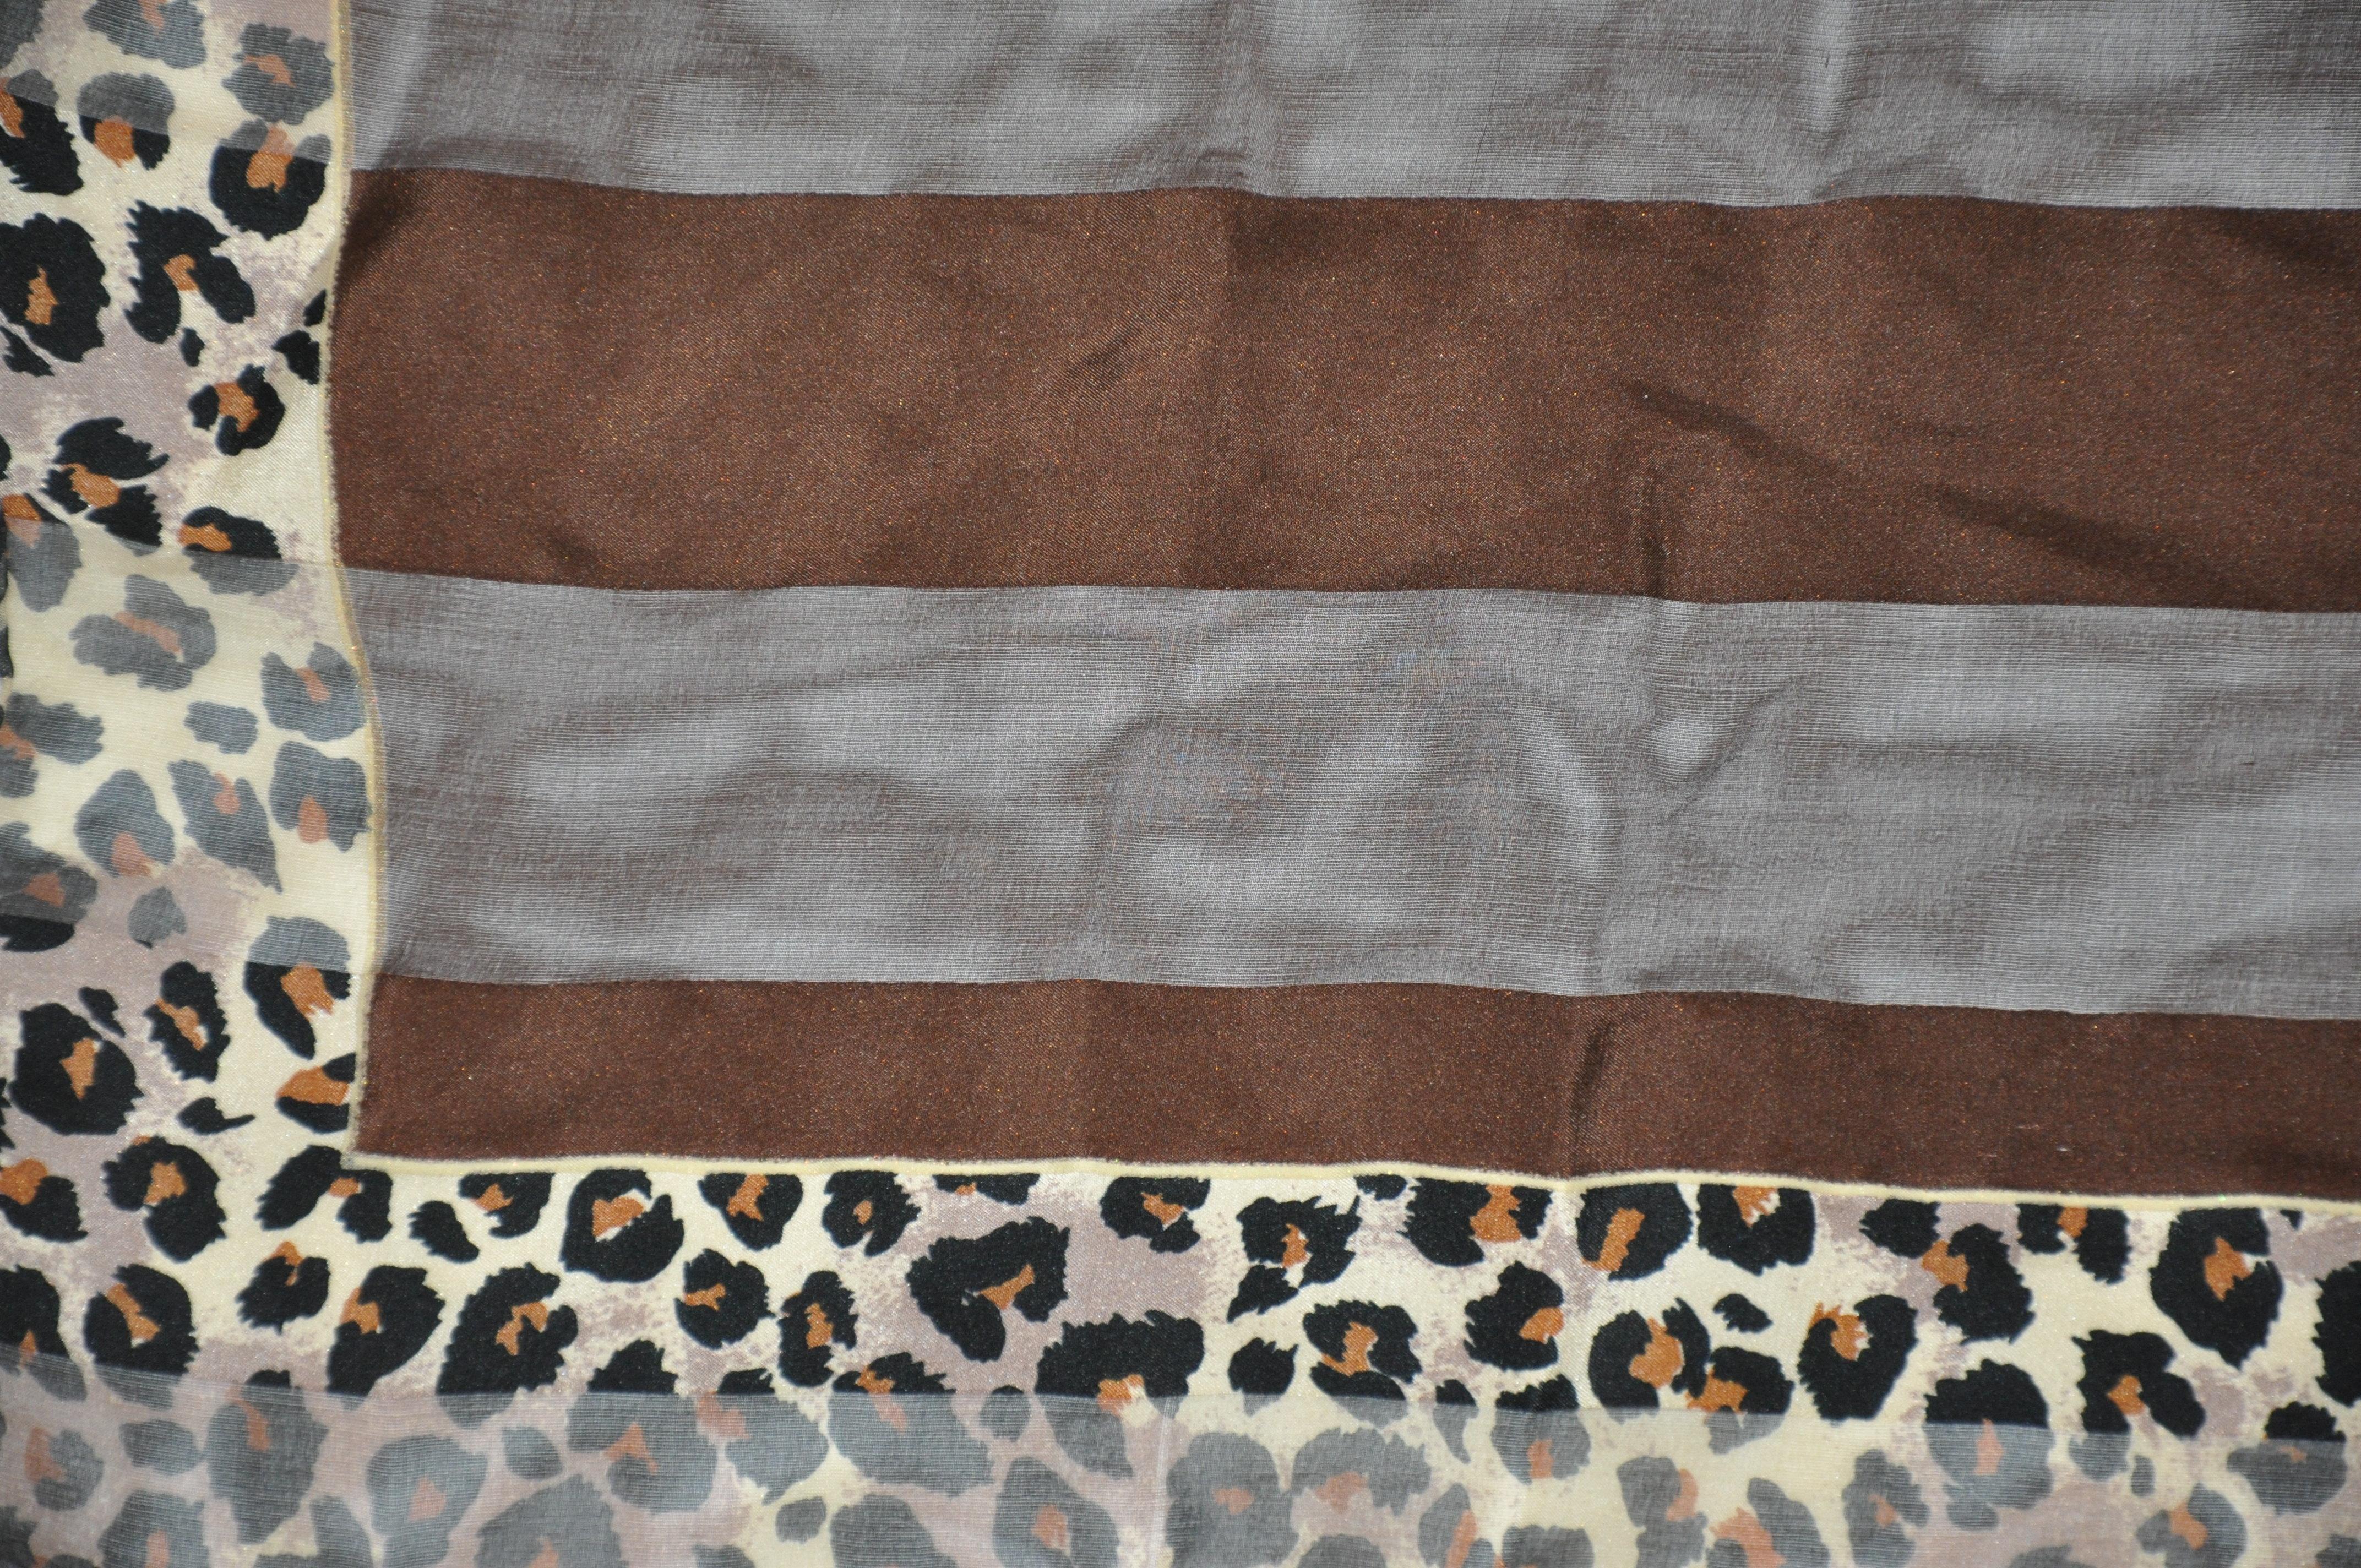 Bill Blass Coco Brown with Leopard Borders Silk and Silk Chiffon Scarf In Good Condition For Sale In New York, NY